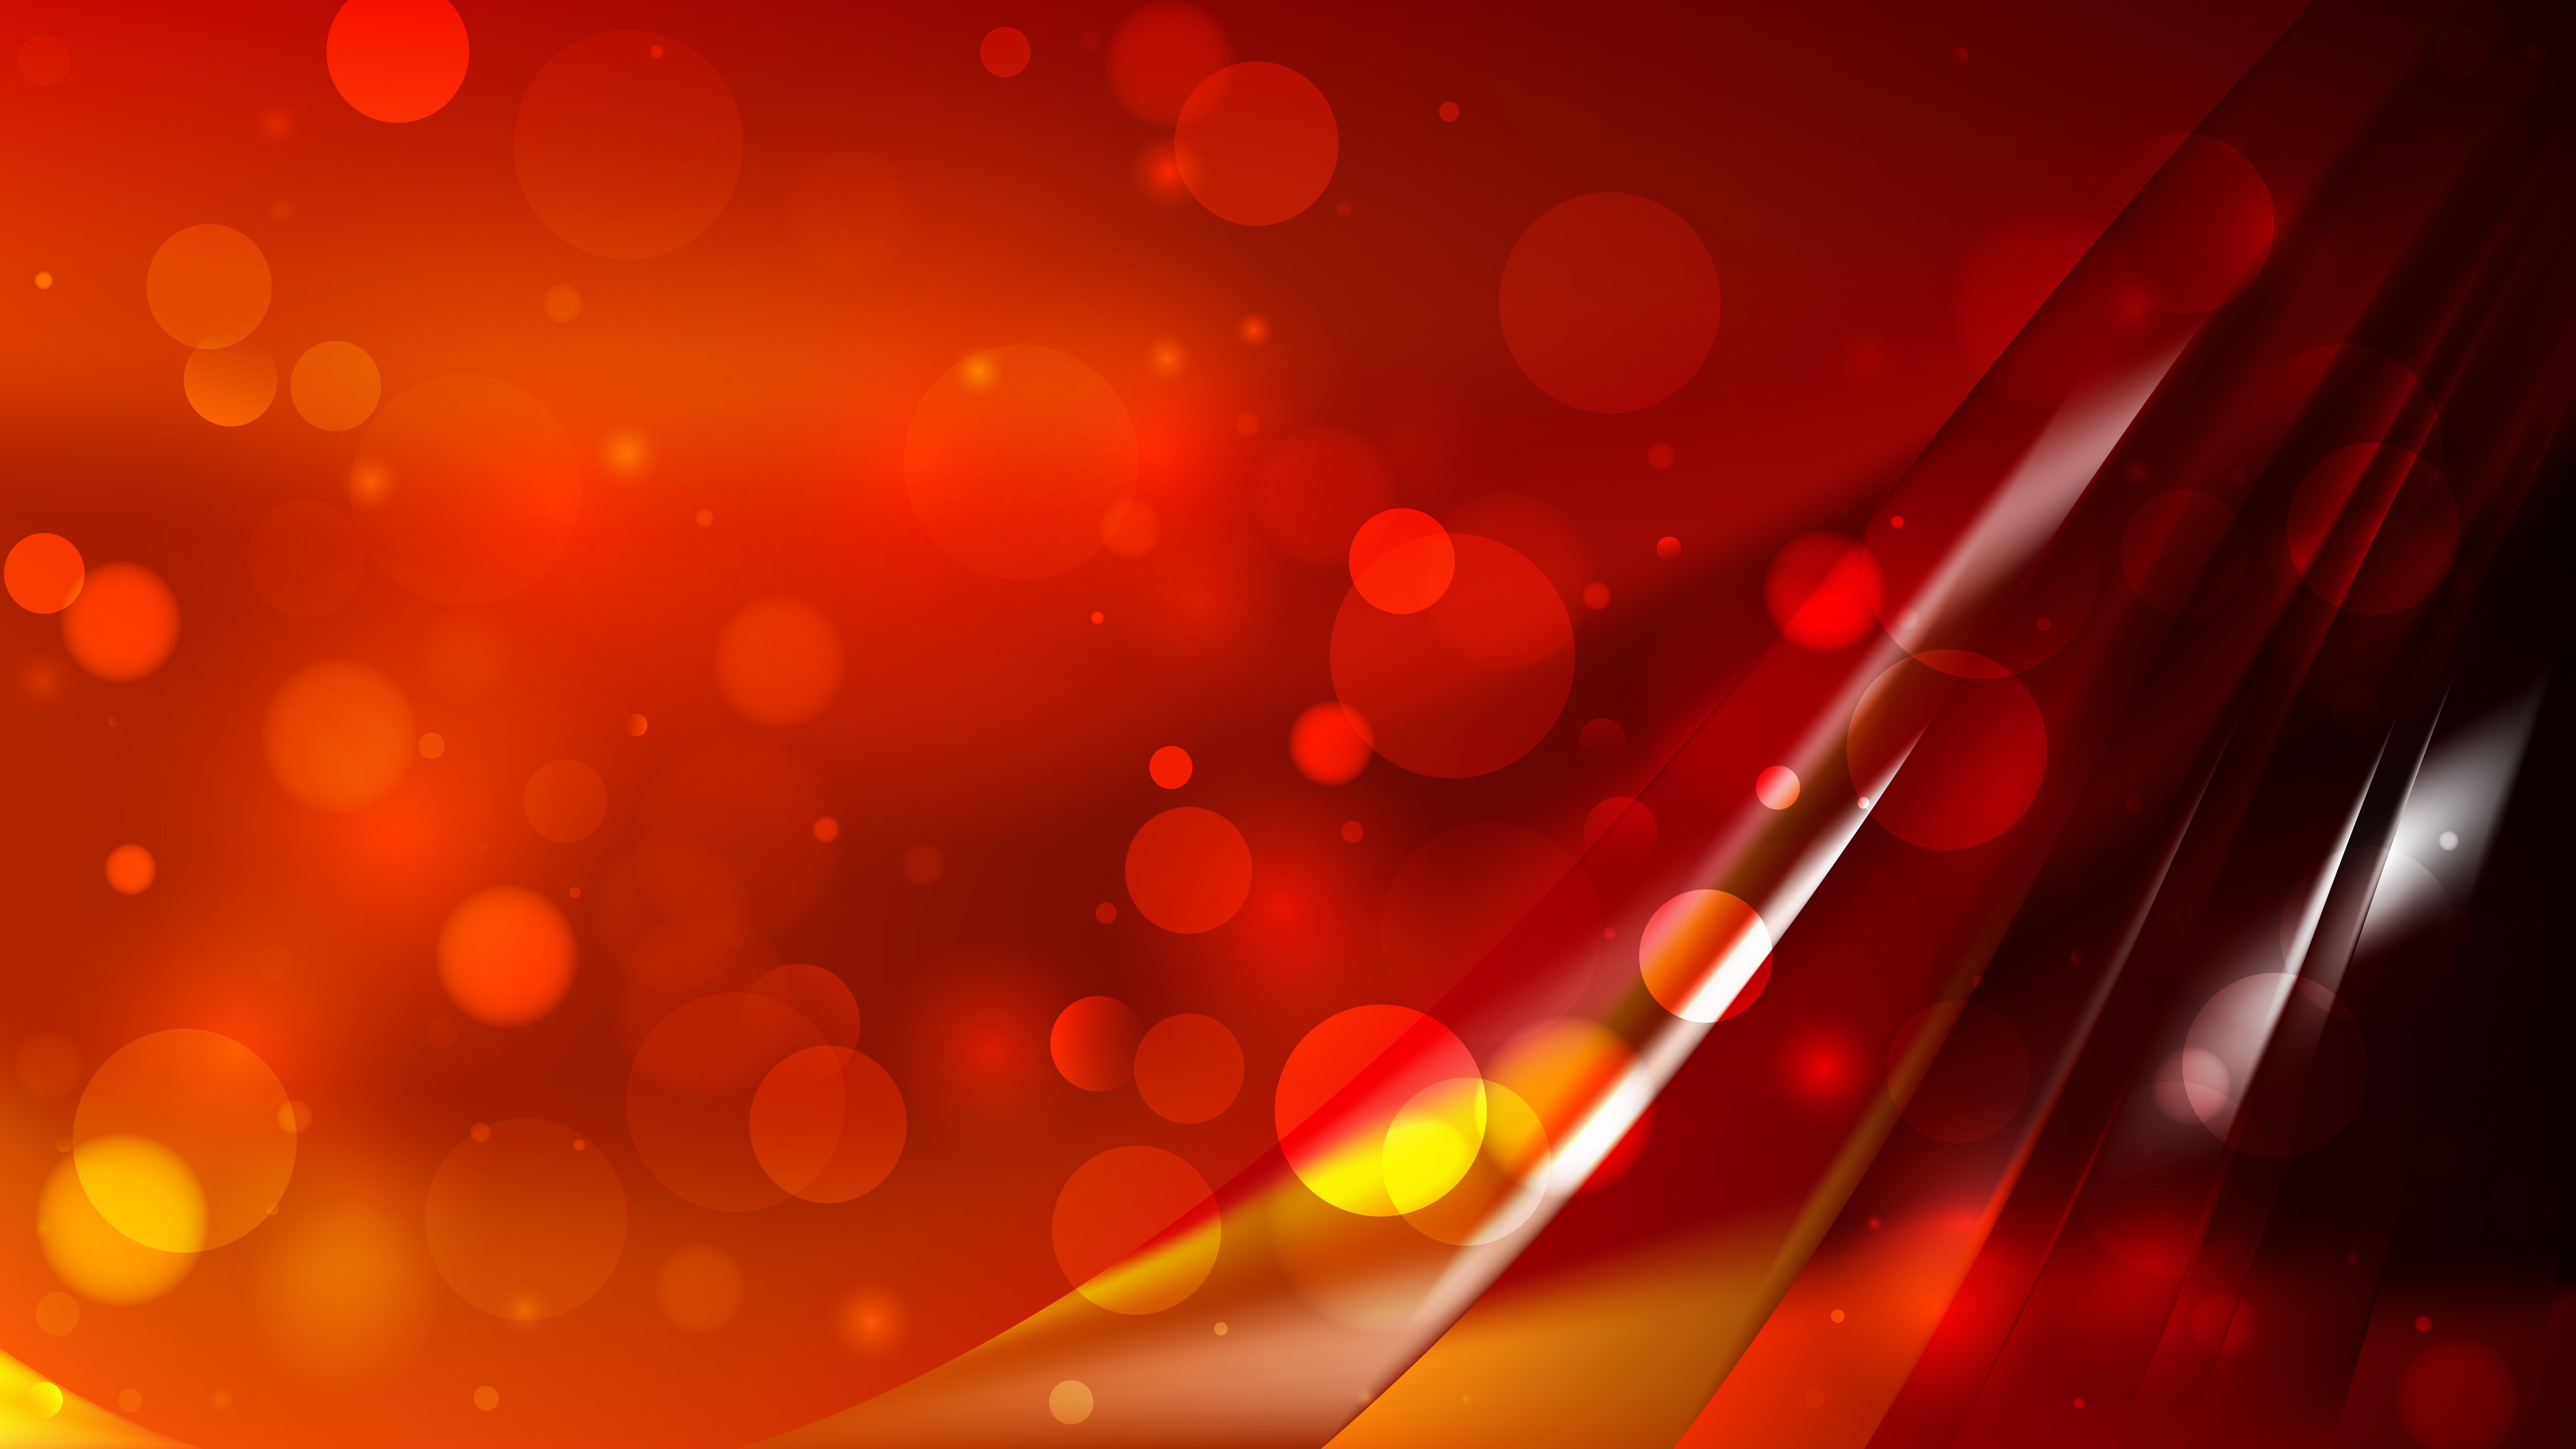 background red and black hd